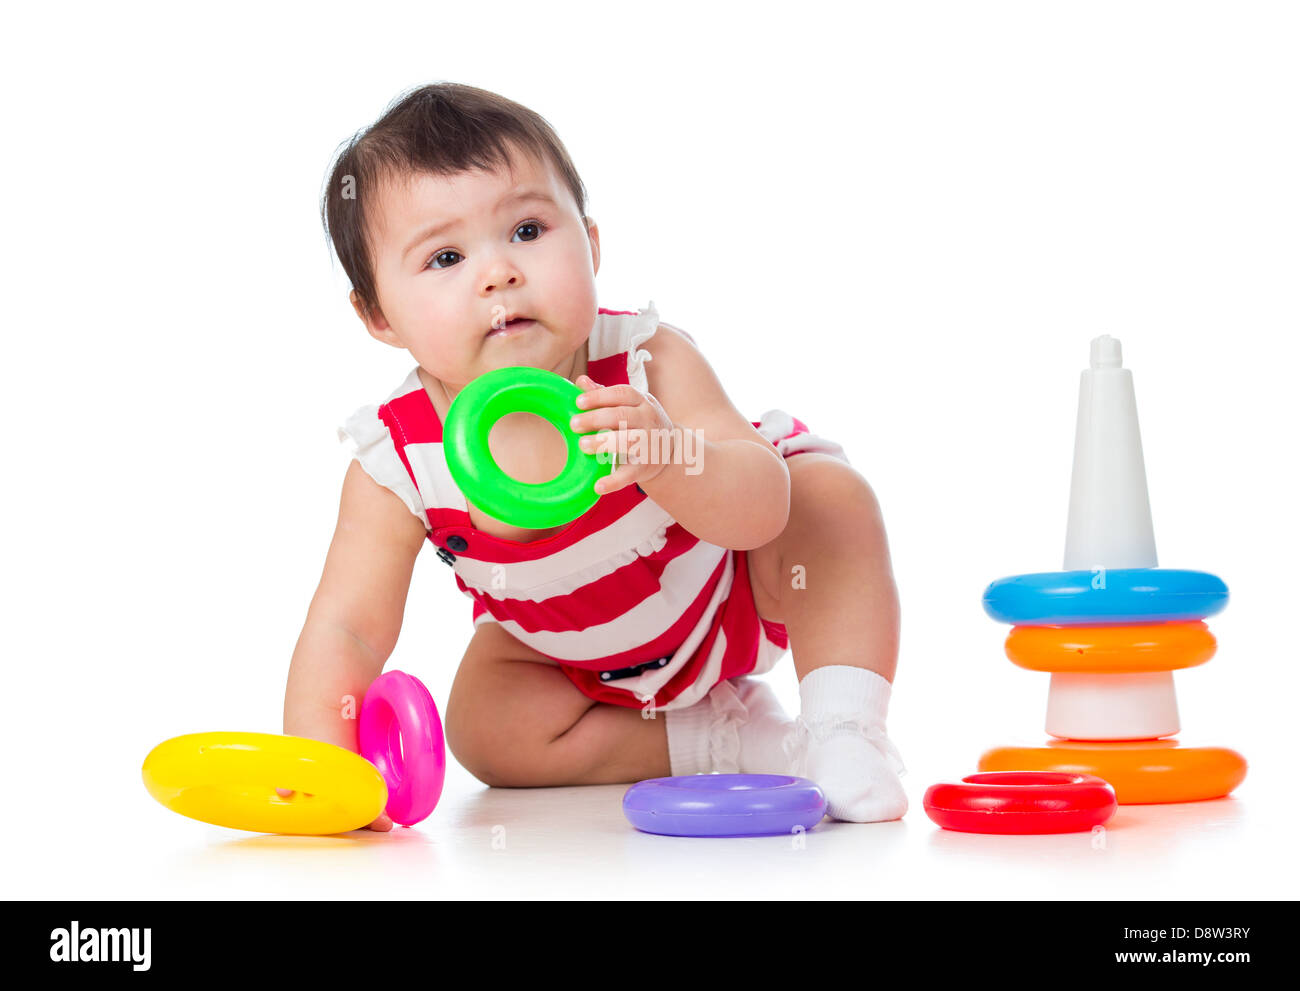 toddler girl playing with pyramid toy Stock Photo